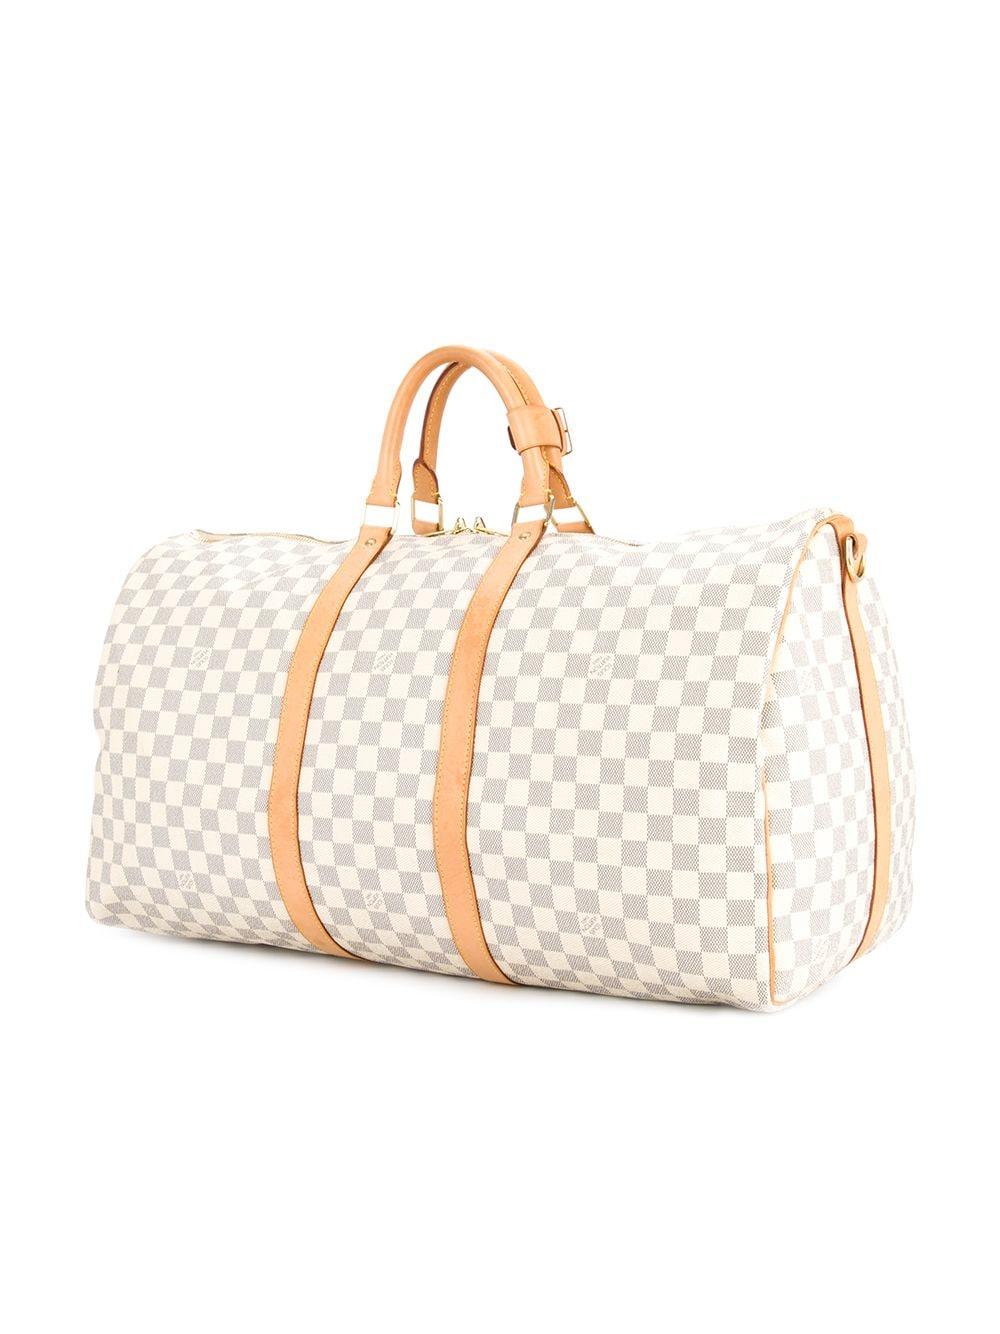 Louis Vuitton Pre-Owned Keepall Bandoulière 55 Duffle Bag in White | Lyst